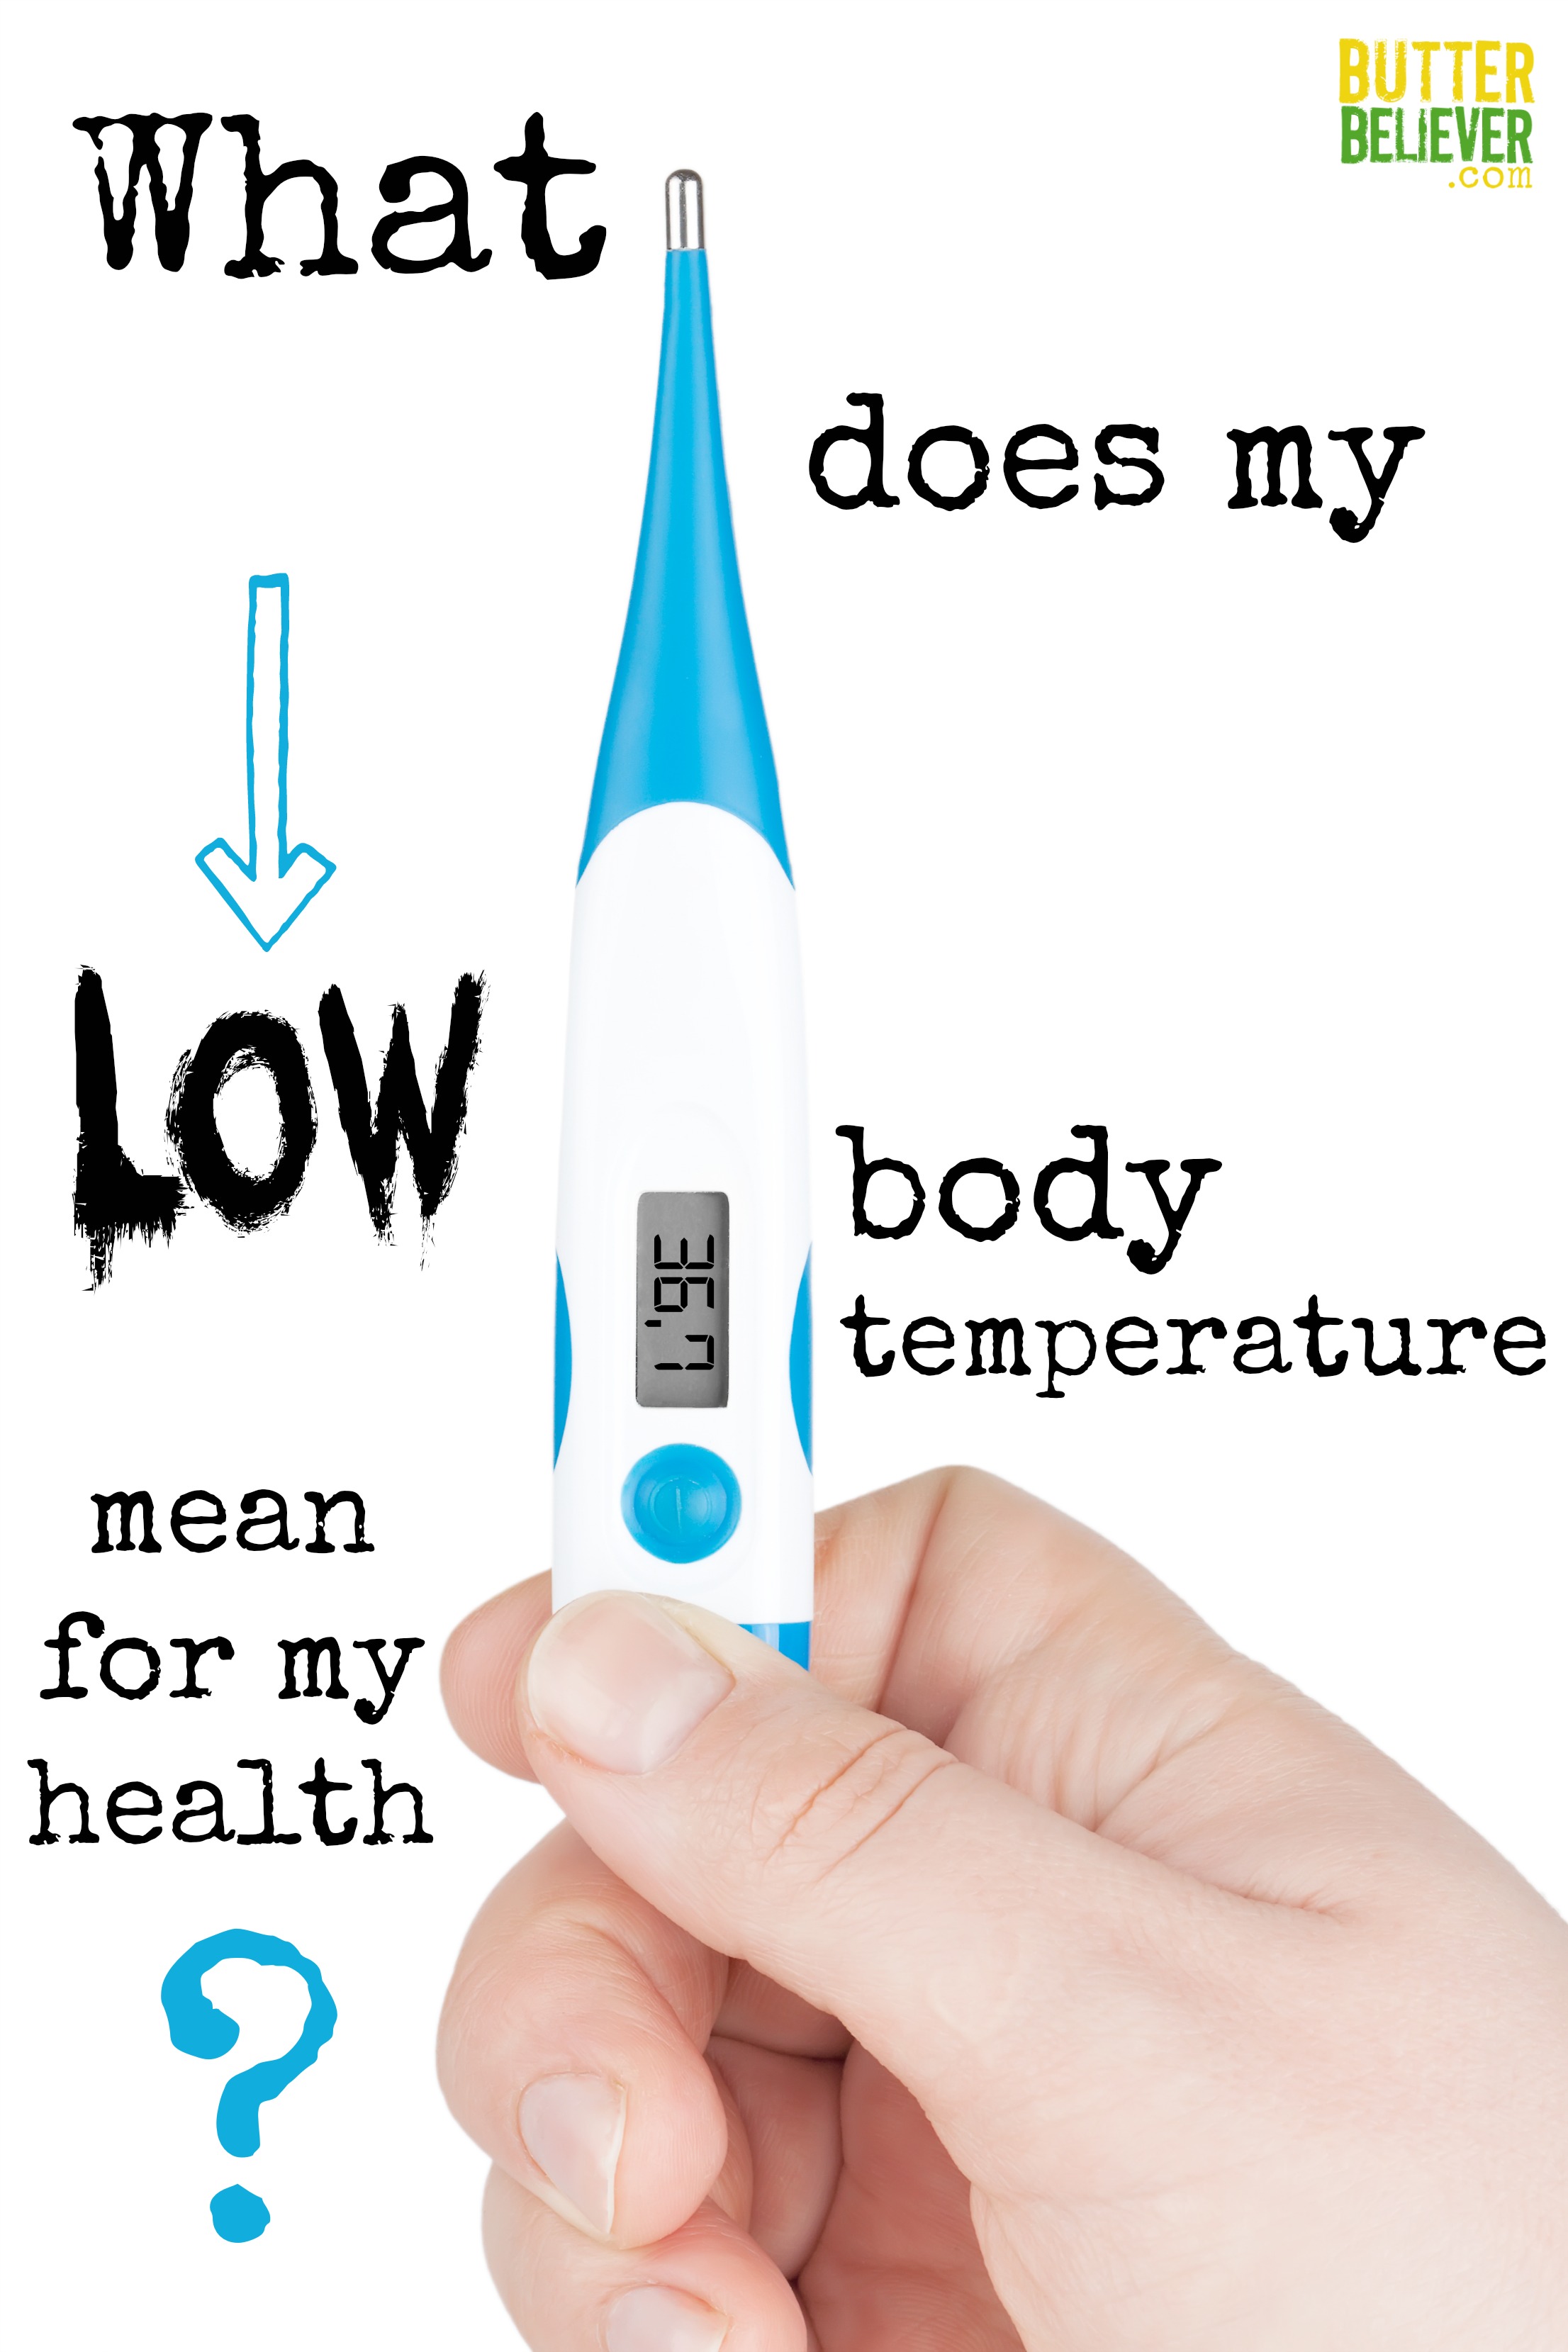 What is core body temperature?